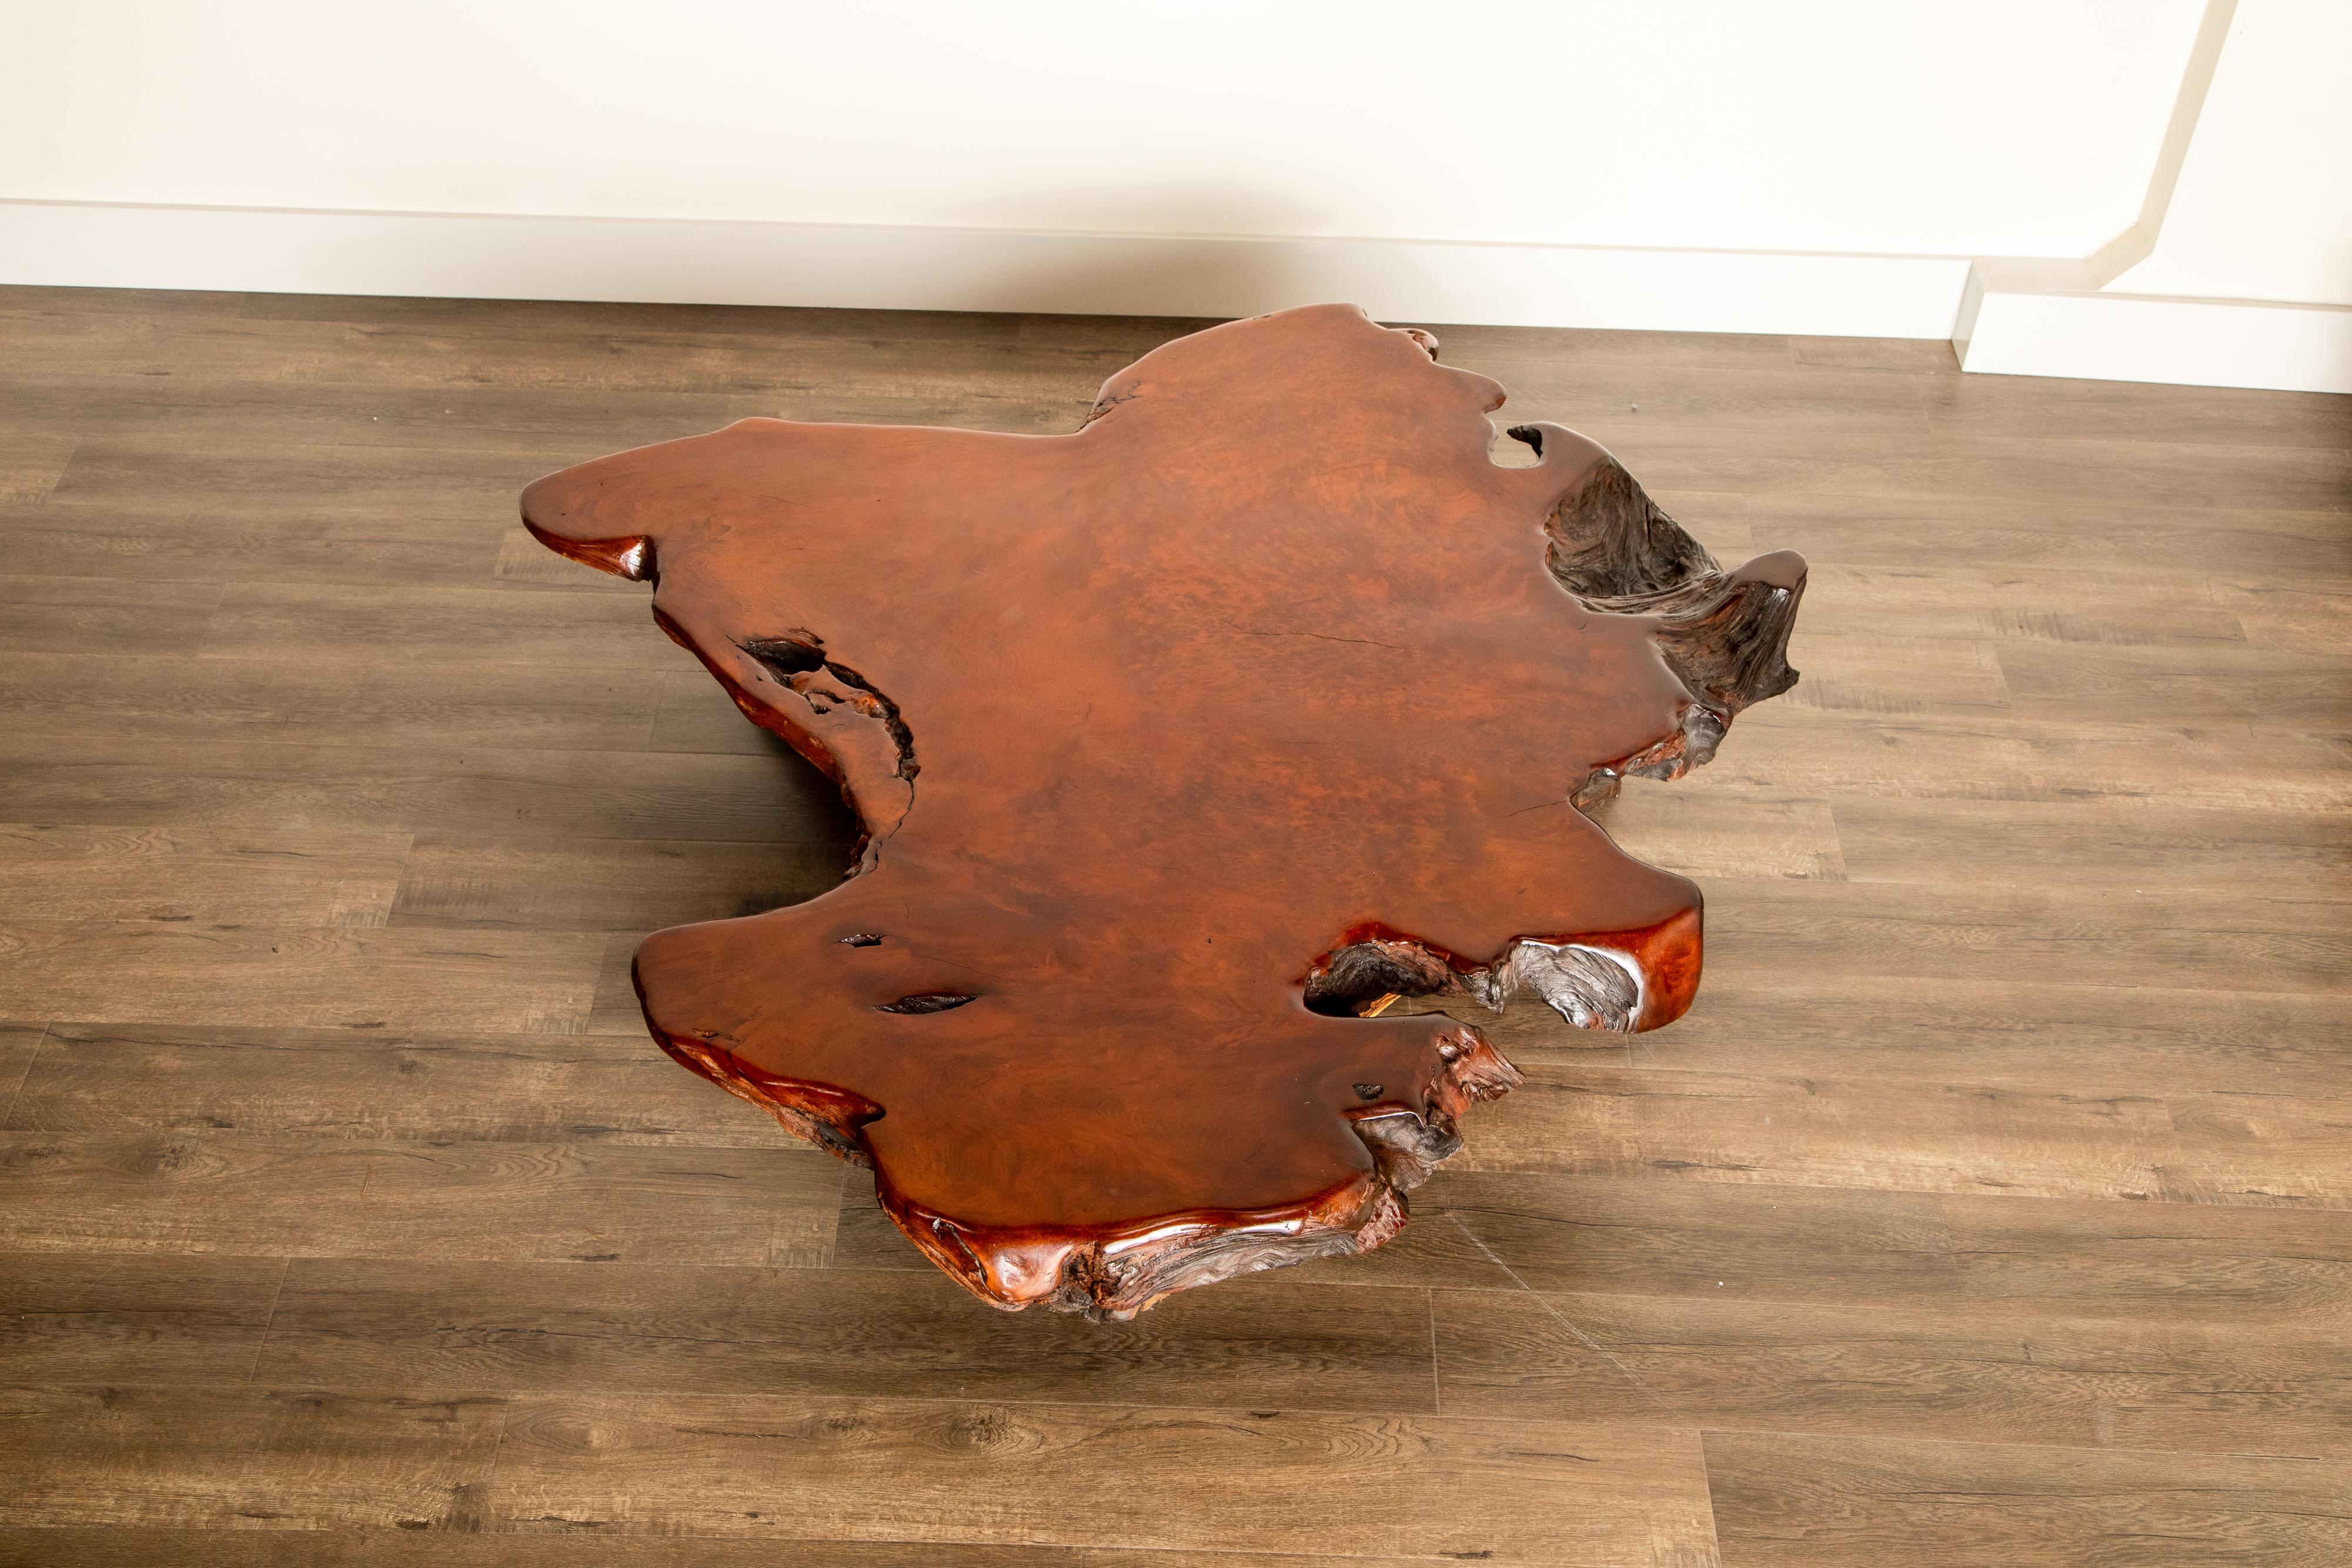 American Craftsman Handcrafted Freeform Live Slab Burl Redwood Coffee Table by Daryl Stokes, 1970s